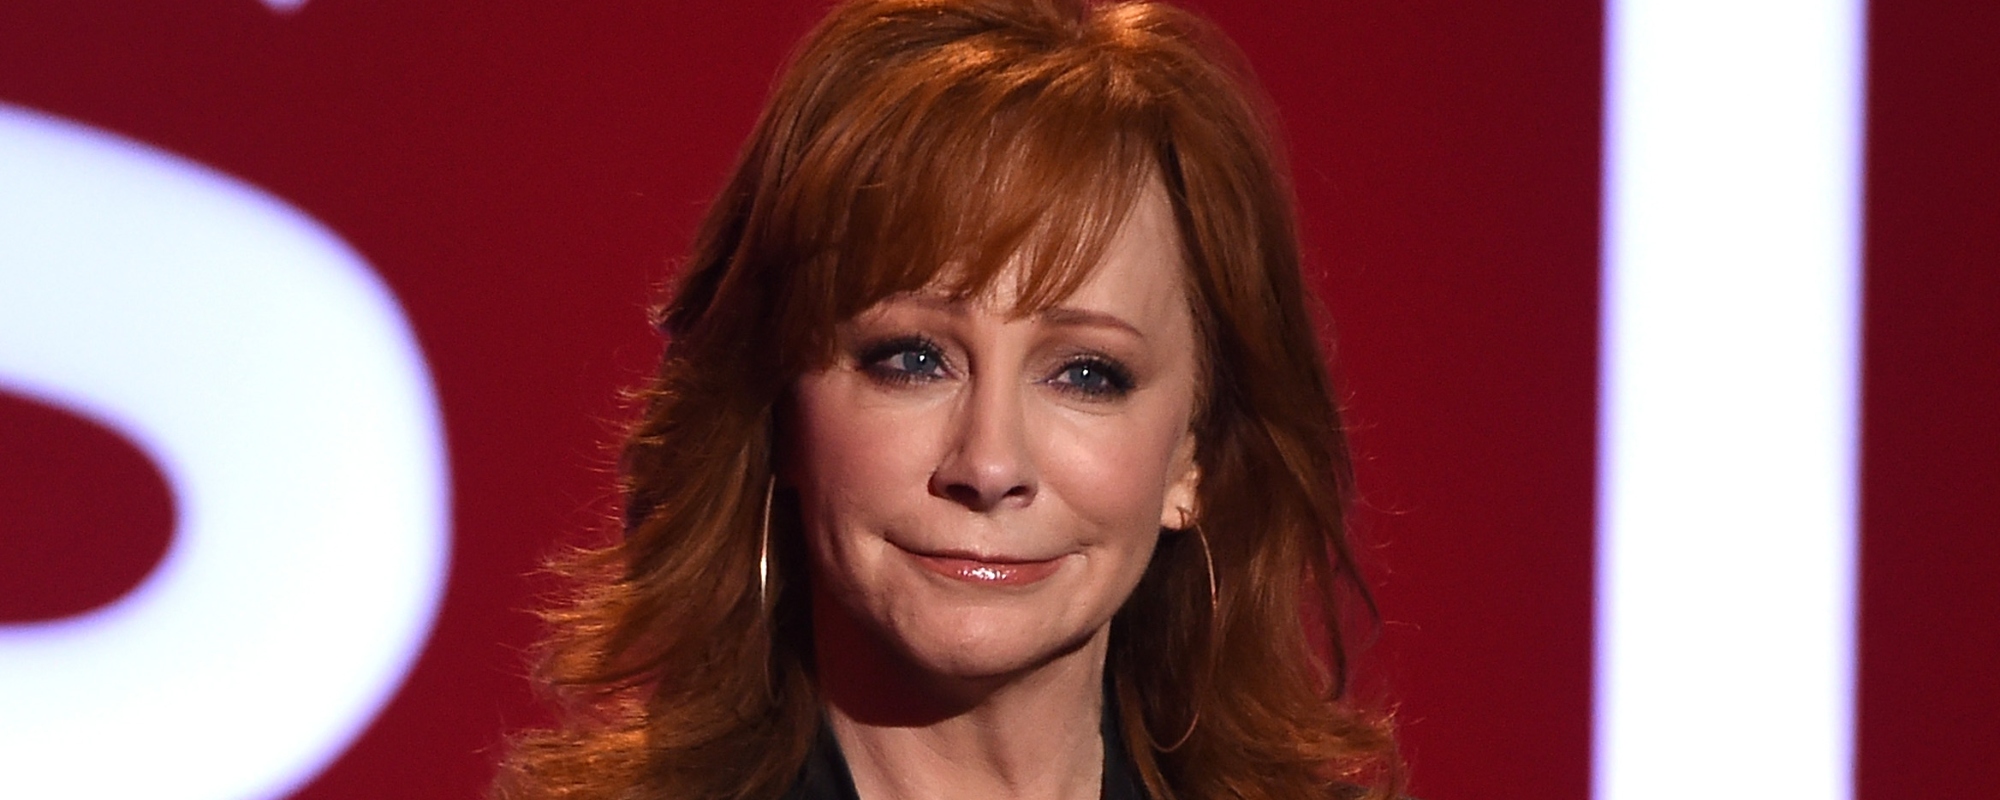 What is Reba McEntire’s Net Worth? How Much Does ‘The Voice’ Host Make?